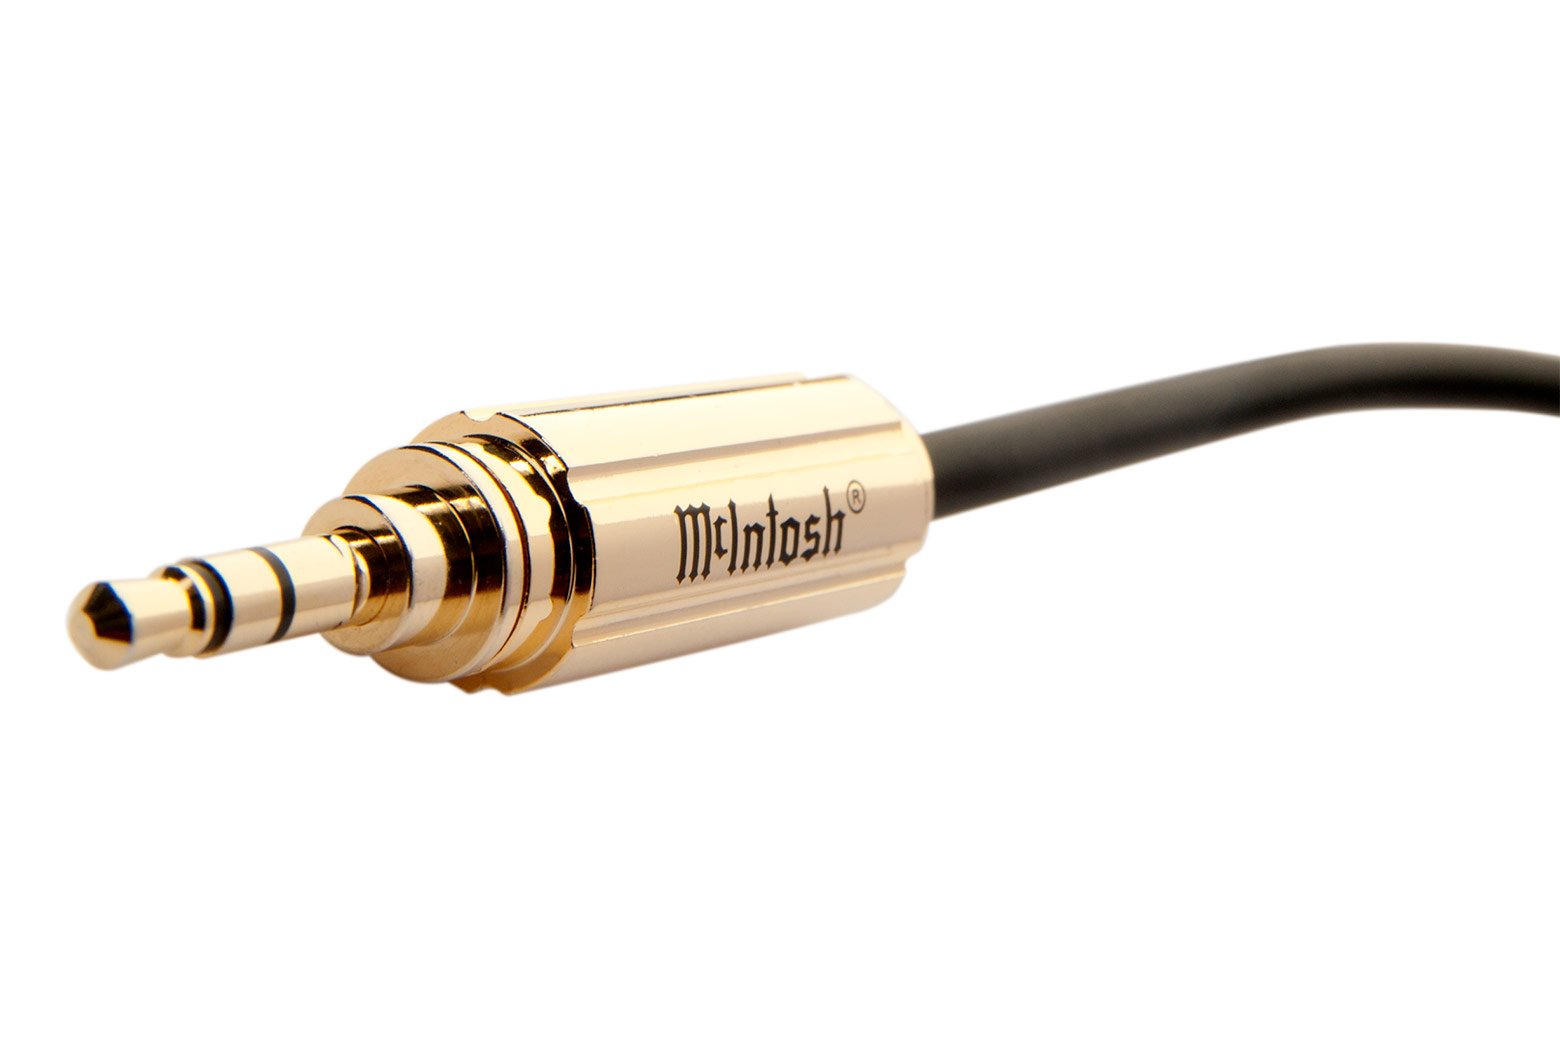 McIntosh Power Control Cables - Sold as a Single (In-Store Purchases Only & USD Pricing)